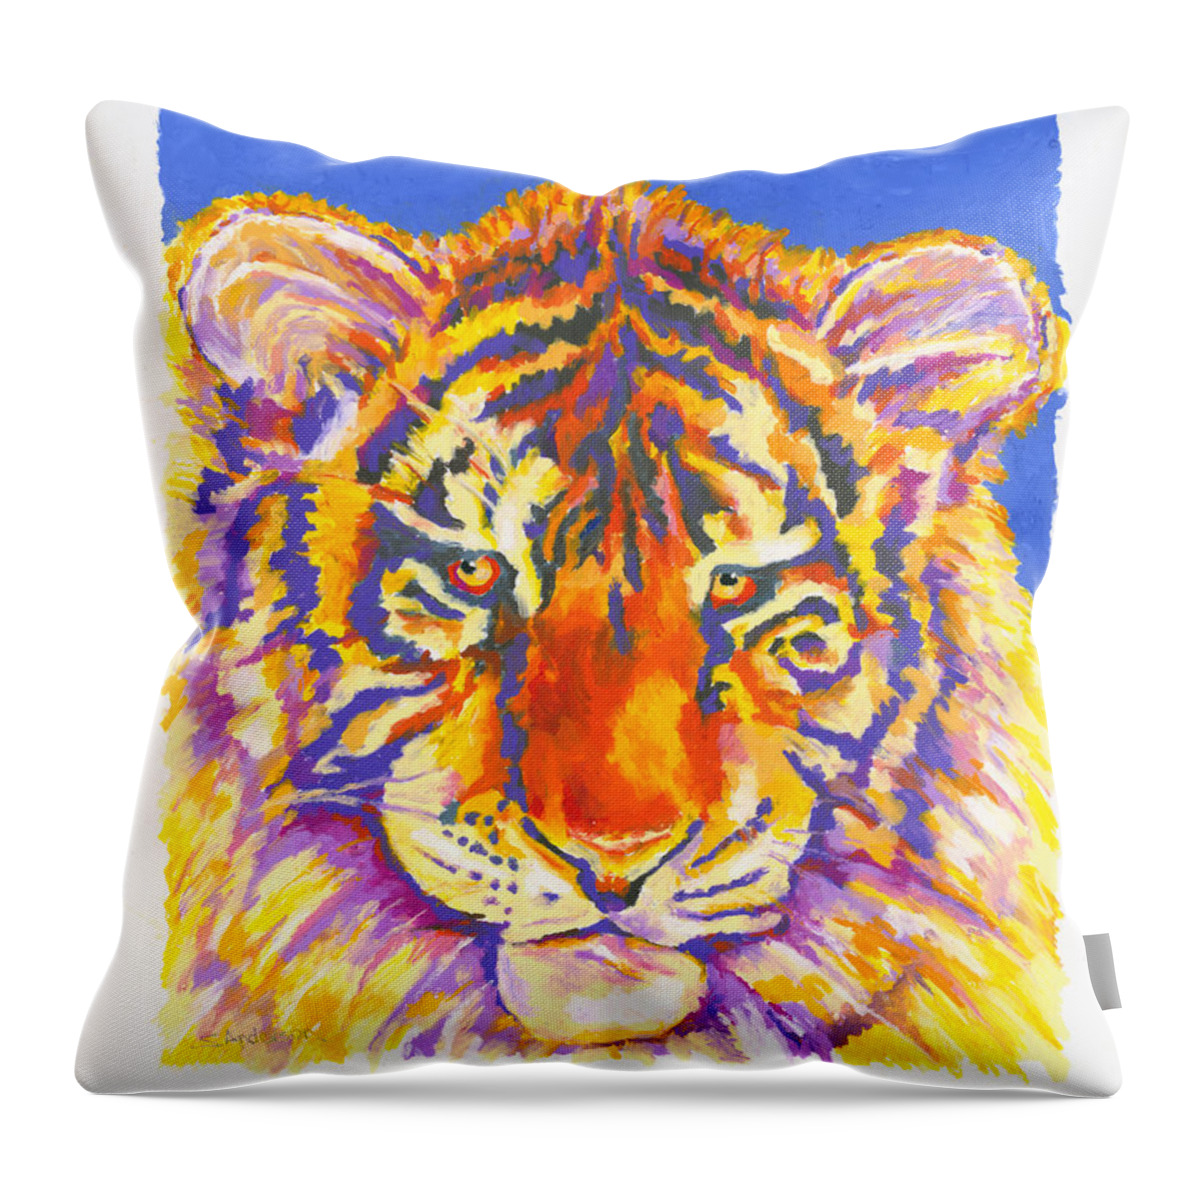 Tiger Throw Pillow featuring the painting Tiger by Stephen Anderson